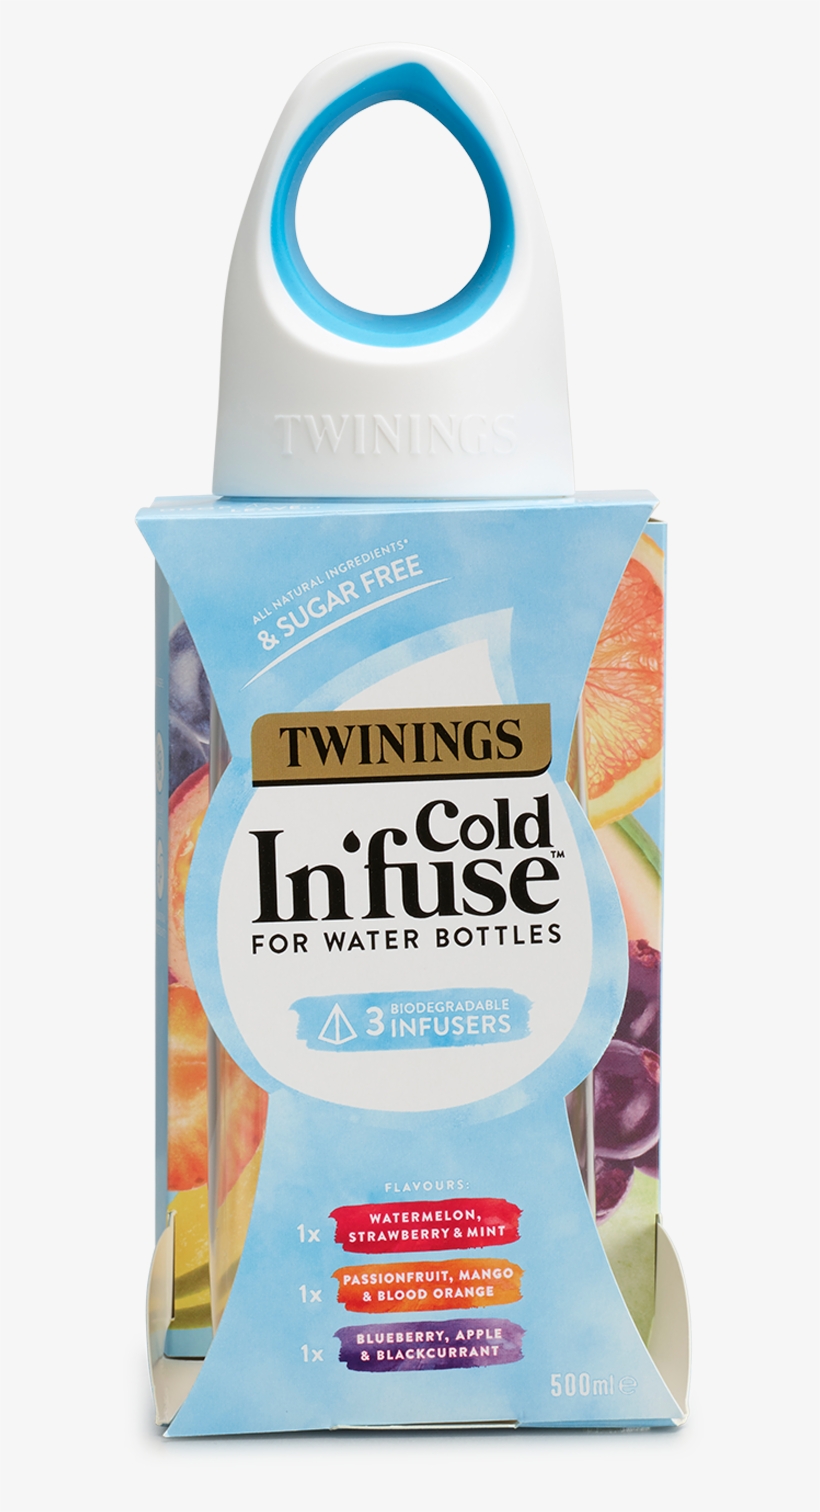 Twinings Cold Infuse Bottle, transparent png #6472590